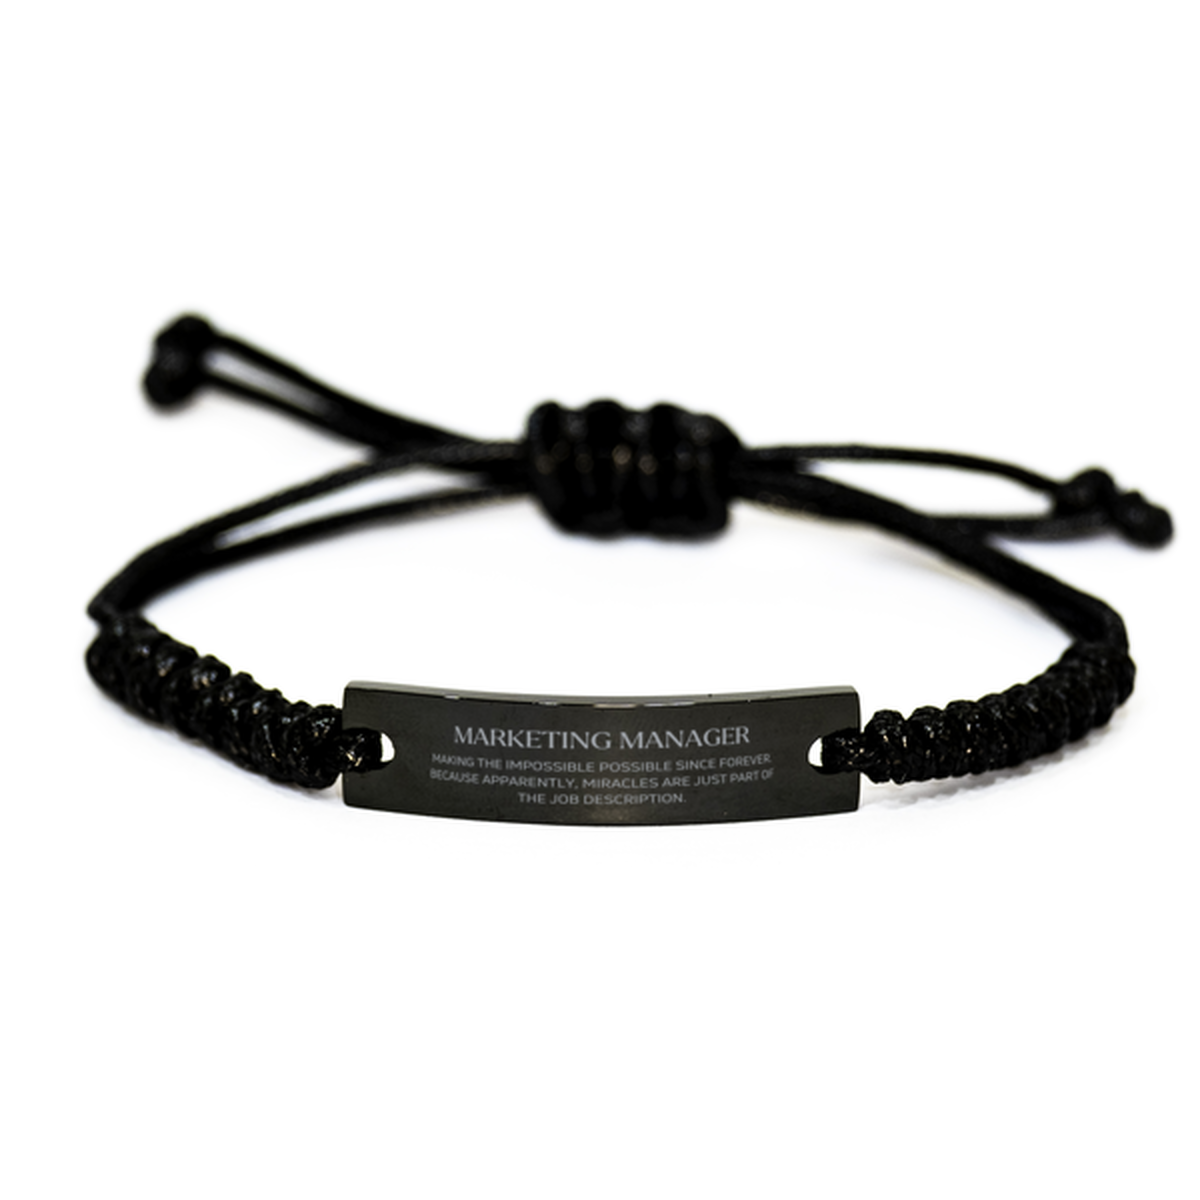 Funny Marketing Manager Gifts, Miracles are just part of the job description, Inspirational Birthday Black Rope Bracelet For Marketing Manager, Men, Women, Coworkers, Friends, Boss